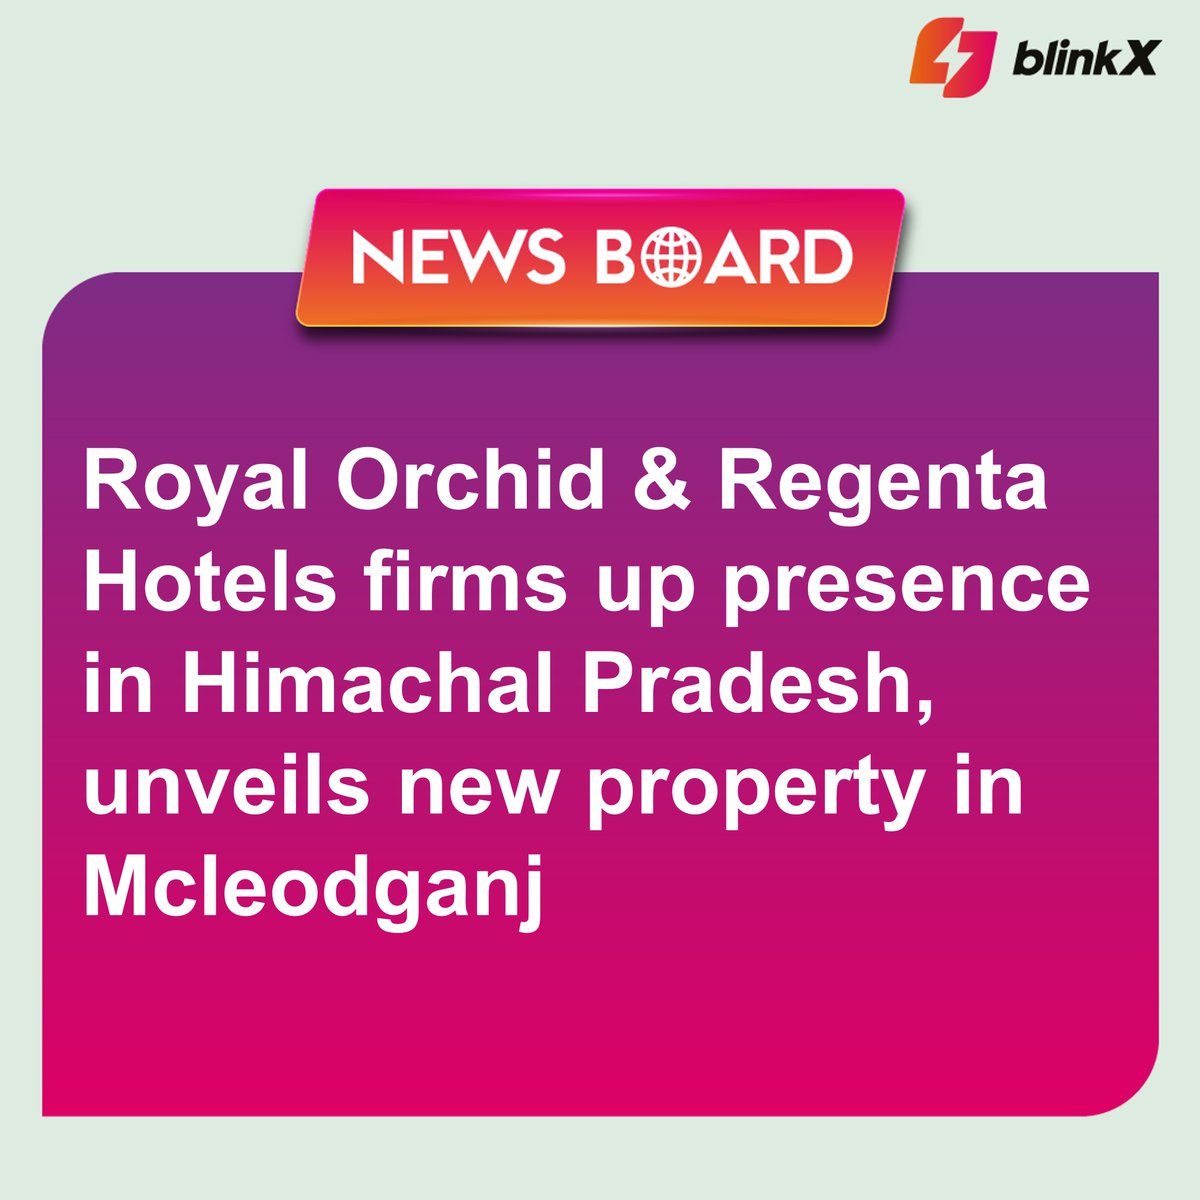 India's fastest-growing hospitality brand, celebrated the opening of its 7th property in the picturesque state of Himachal Pradesh. 

The new property, Regenta Inn Luxinna, Bhagsung, is located in the serene hill town of Mcleodganj, a suburb of Dharamshala.

#Regenta #Mcleodganj